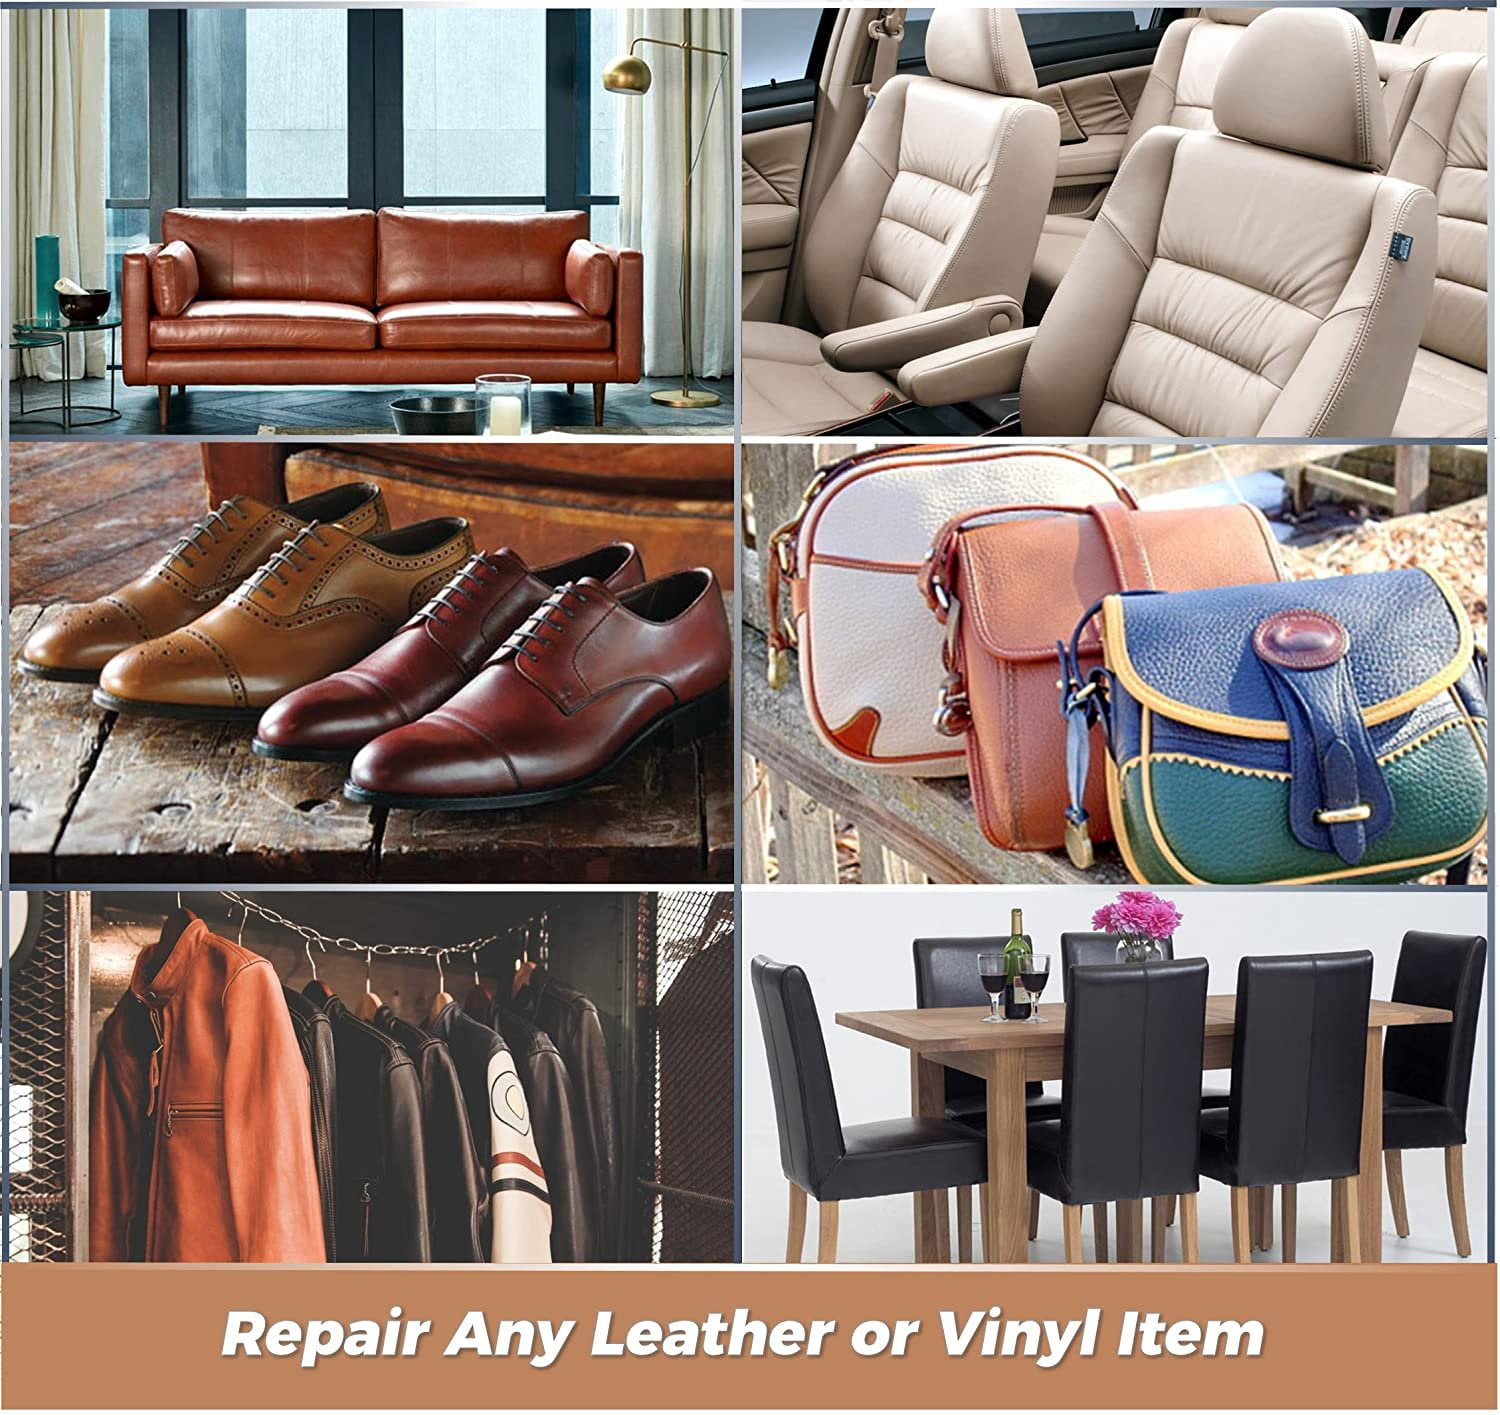 Leather Repair Kit Restore Couch Furniture Car - Light Beige Cashmere